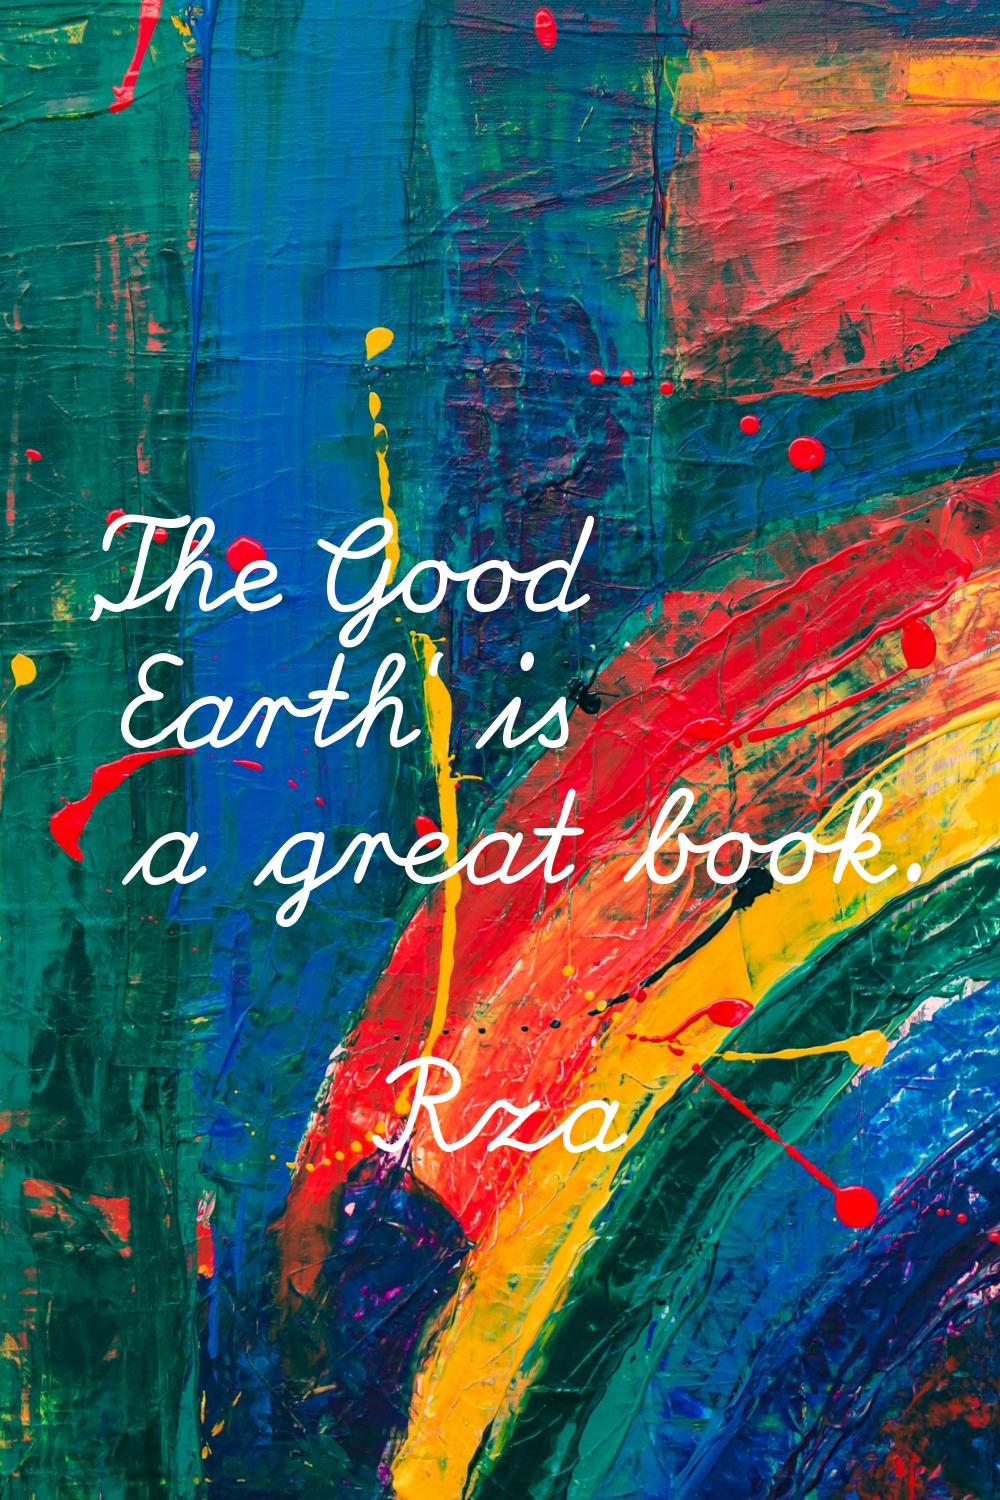 'The Good Earth' is a great book.